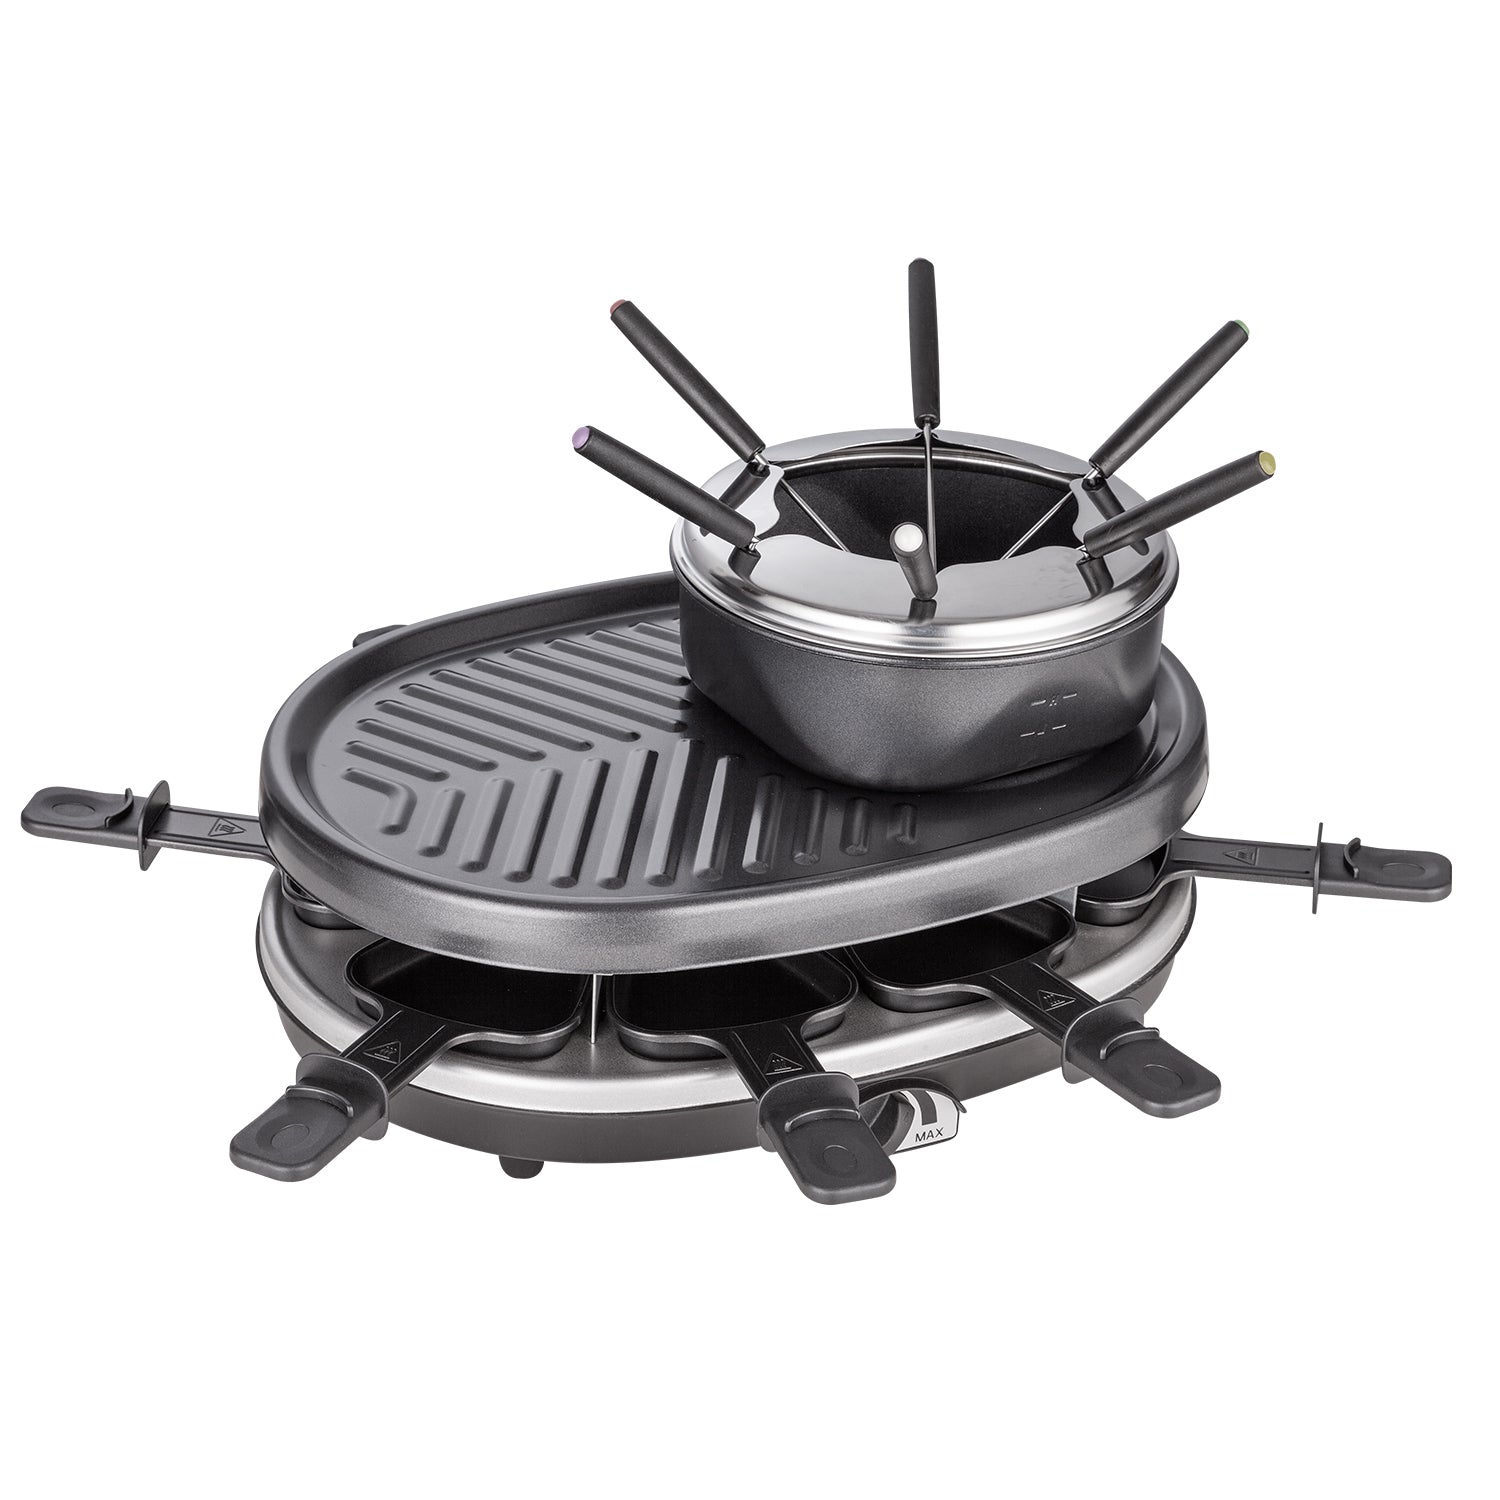 Electric griddle with hot pot